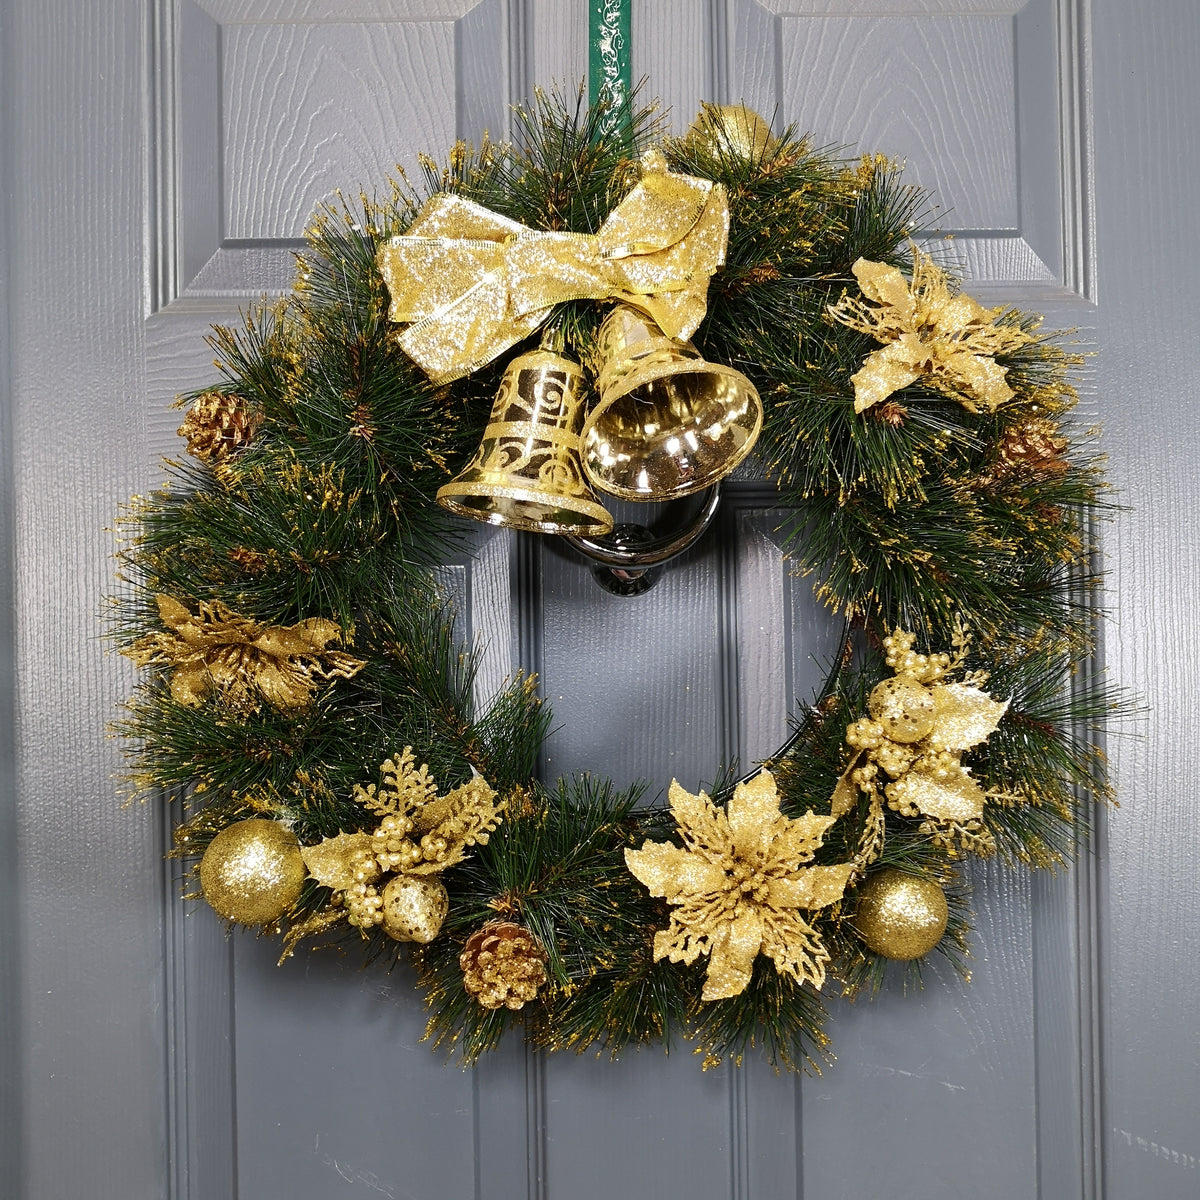 50cm Premier Christmas Wreath with Gold Glitter Tips, Bells & Decorations